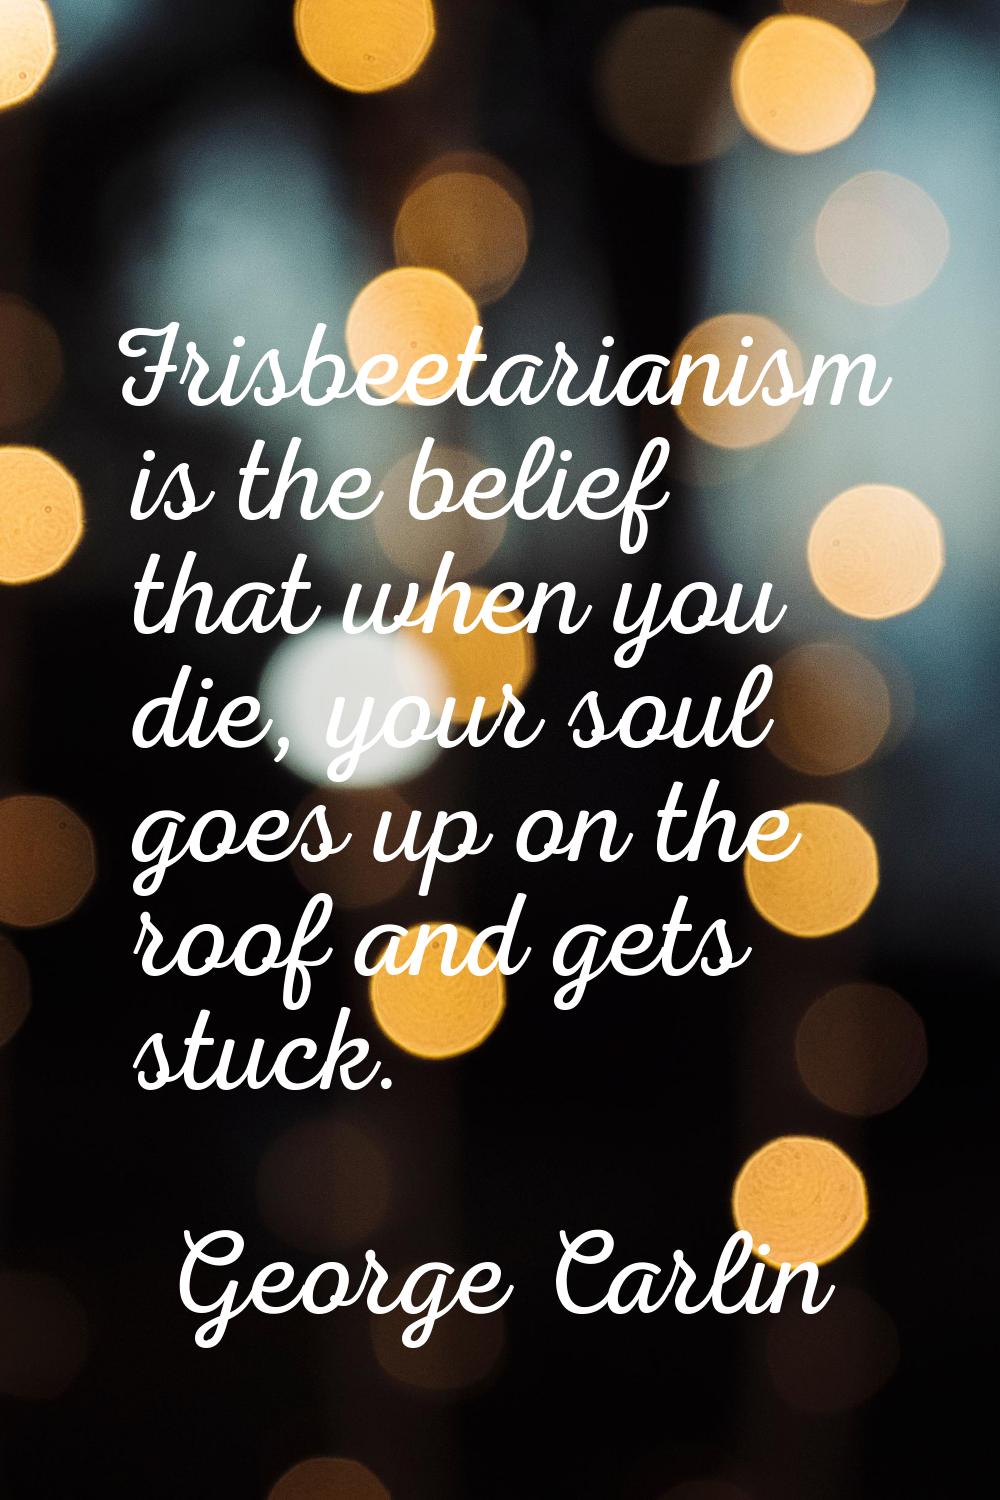 Frisbeetarianism is the belief that when you die, your soul goes up on the roof and gets stuck.